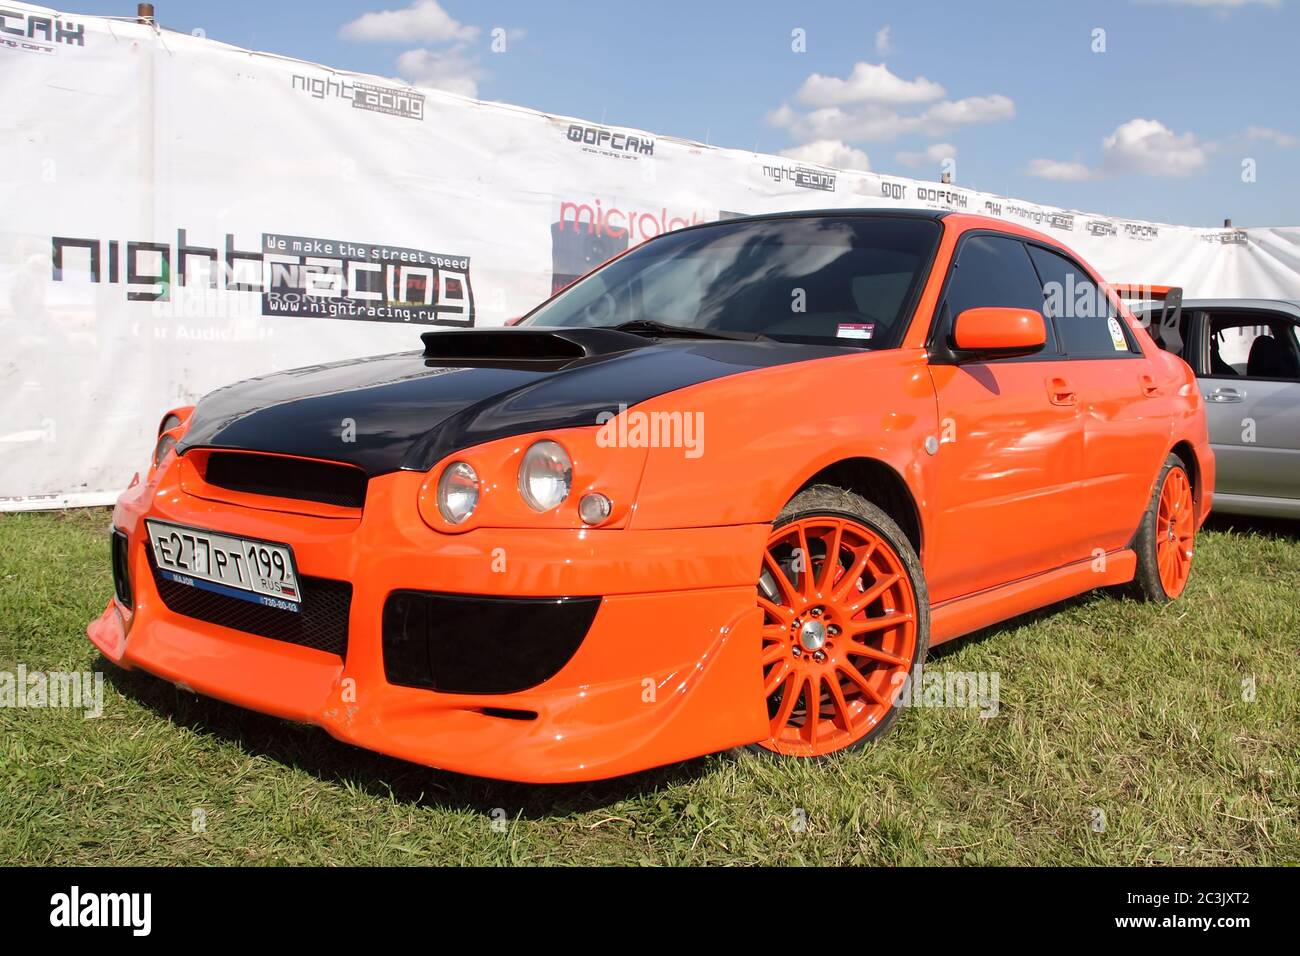 Moscow, Russia - May 25, 2019: A bright orange Subaru WRX STI tuned in a  body kit with orange alloy wheels stands on the street Stock Photo - Alamy